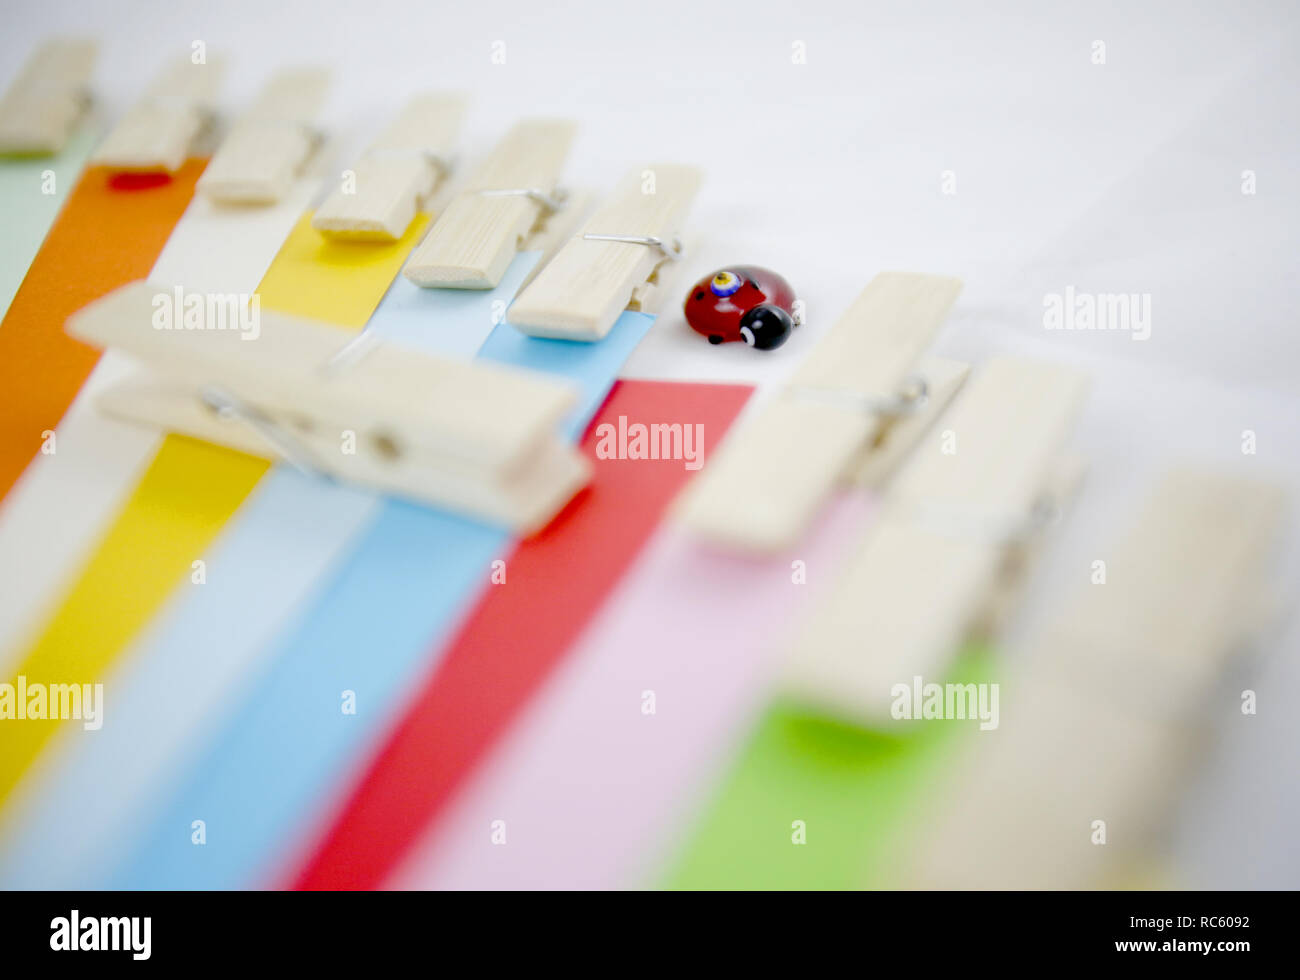 Wood latches and colourful paper and ladybug. Stock Photo